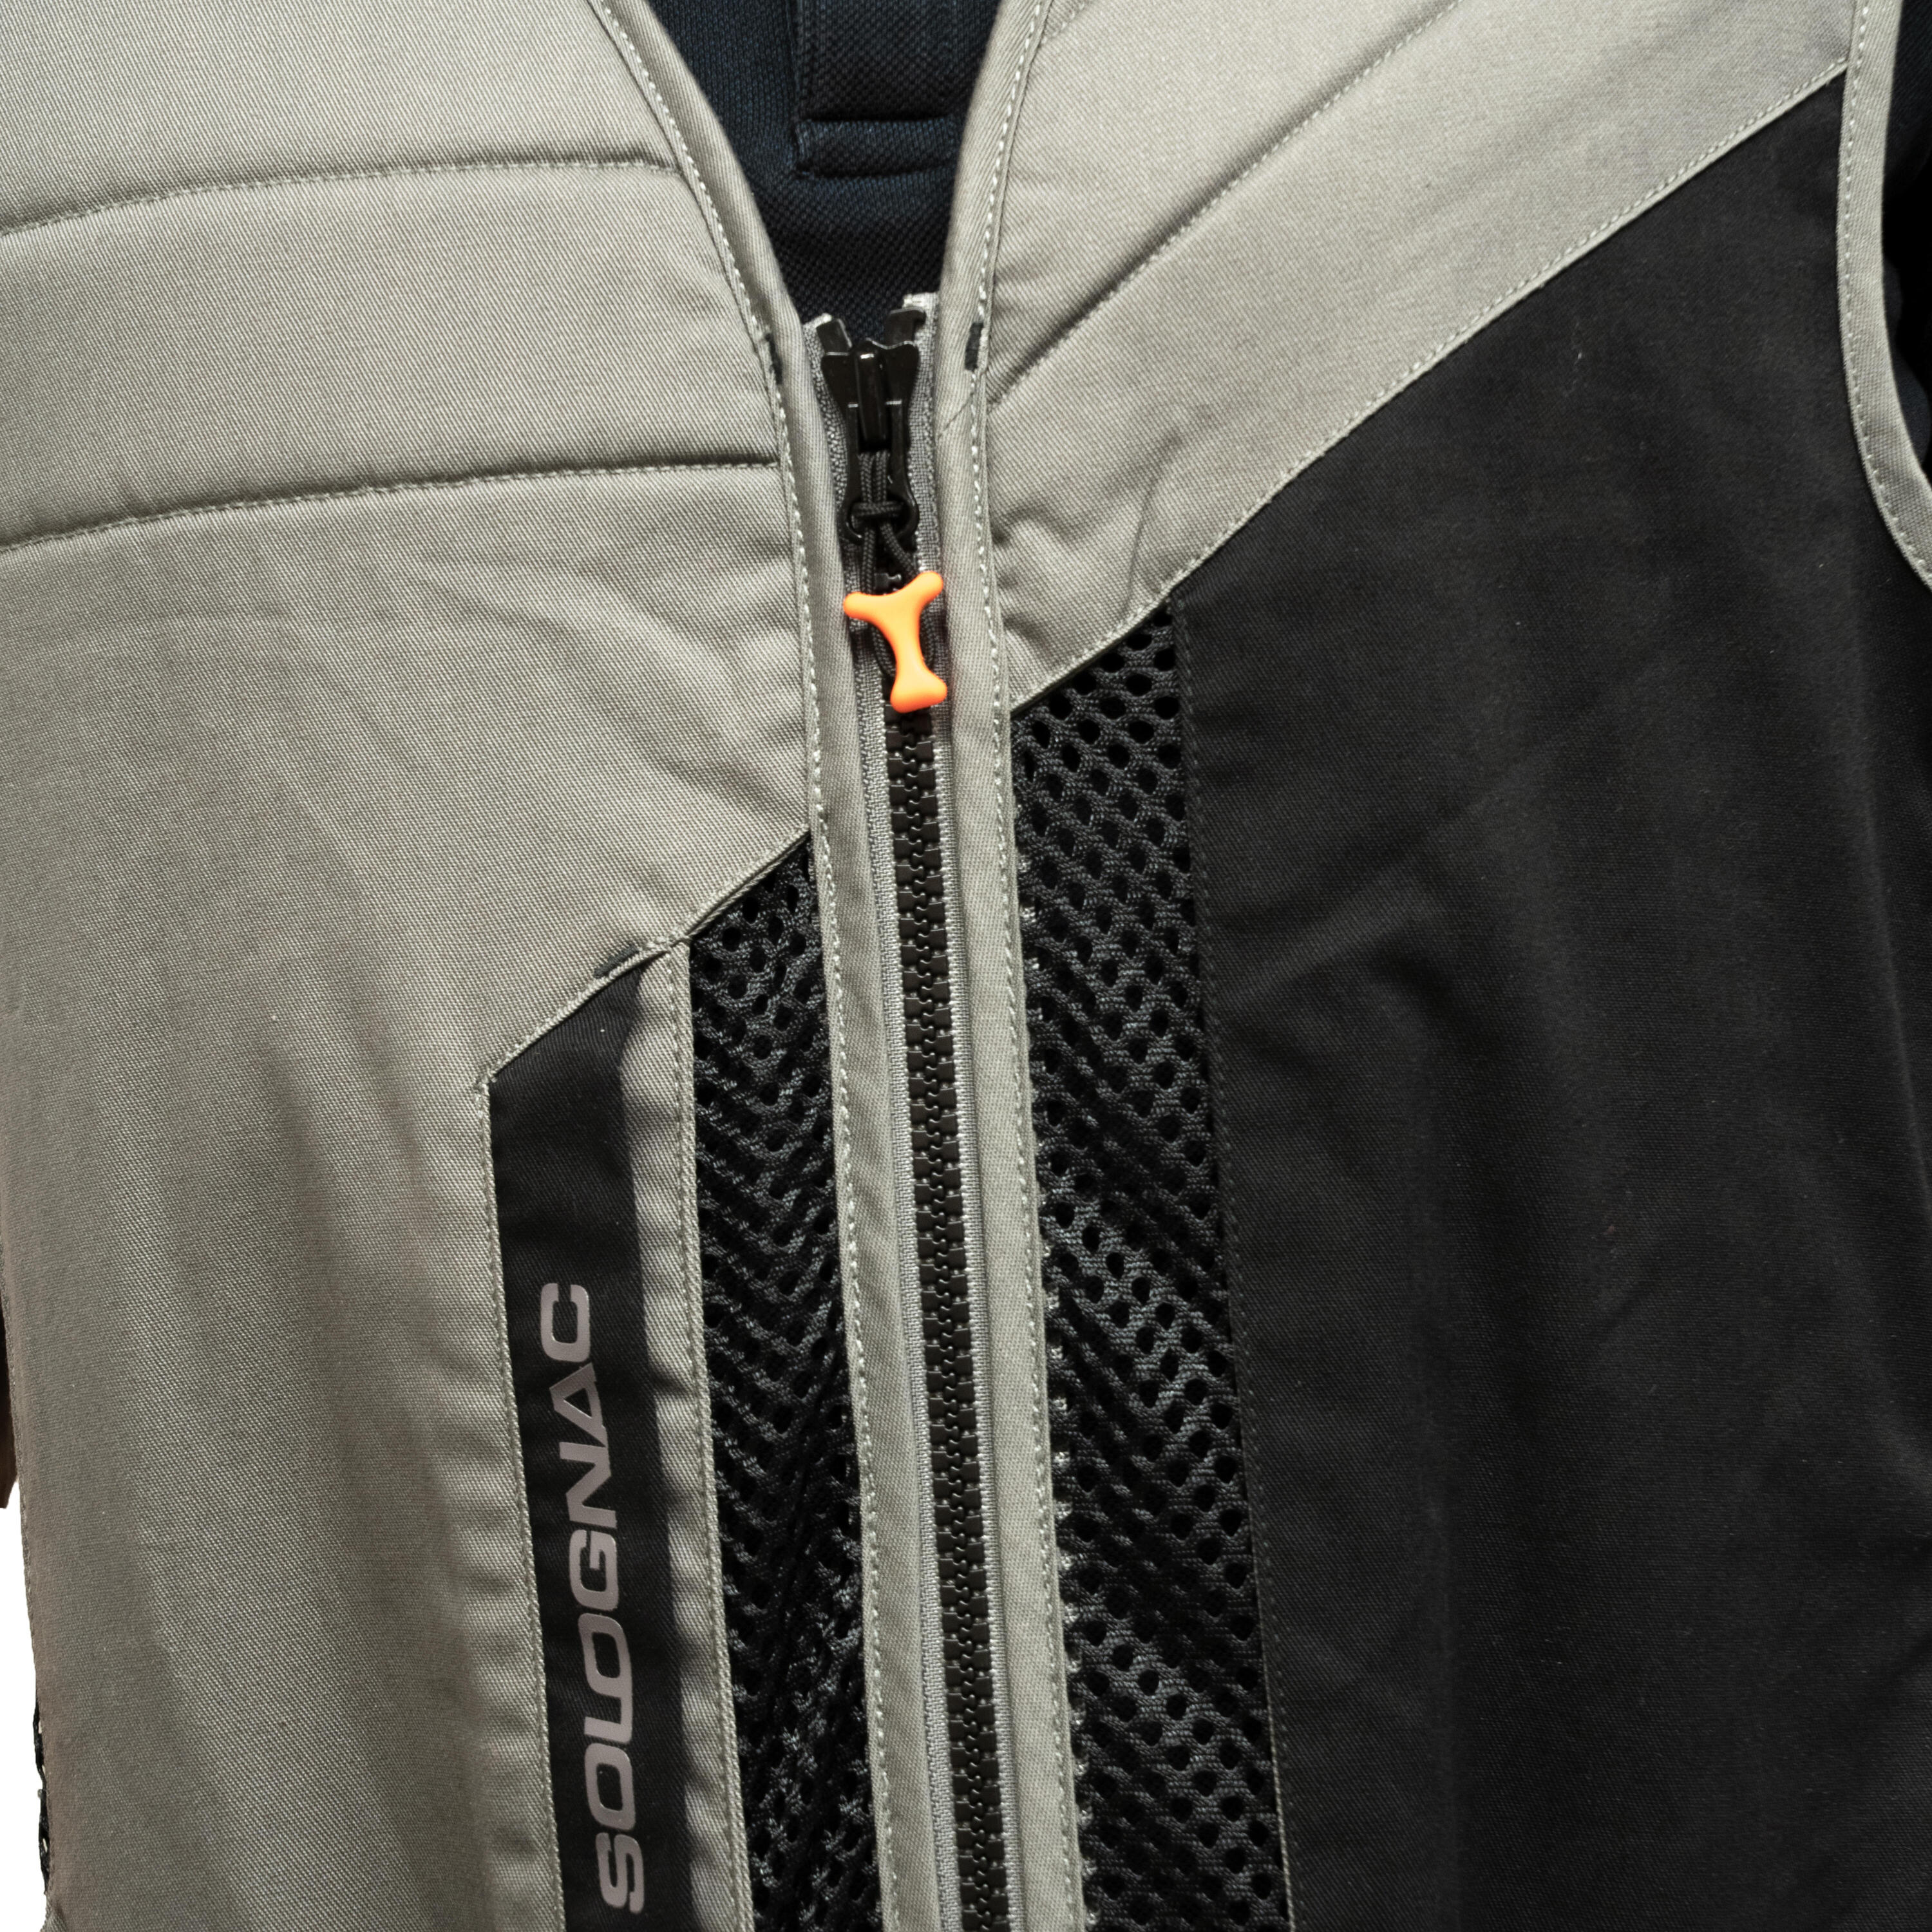 CLAY PIGEON 500 JACKET GREY BLACK (limited edition). 7/9